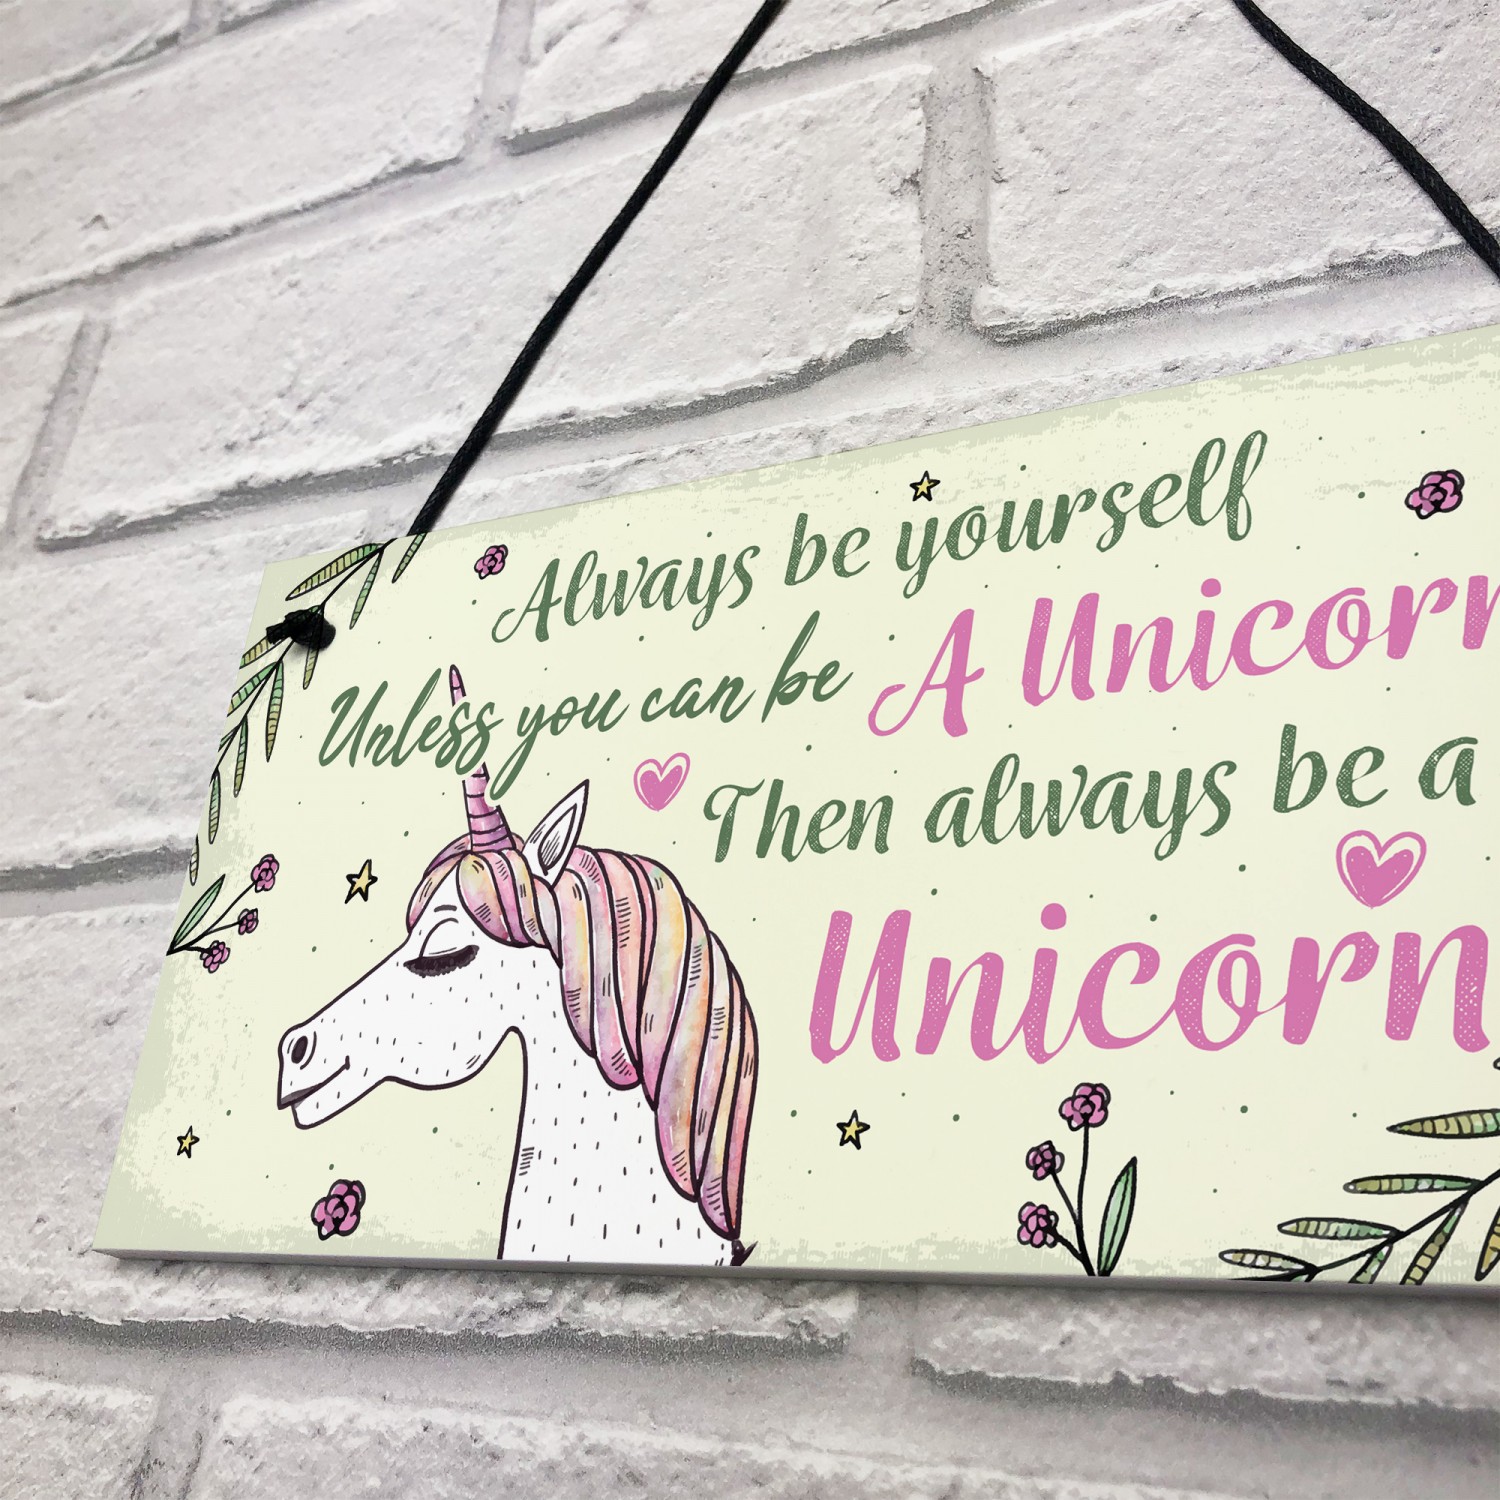 Details about   Always be Yourself Unless you can be a unicorn METAL Wall Sign Plaque sign gift